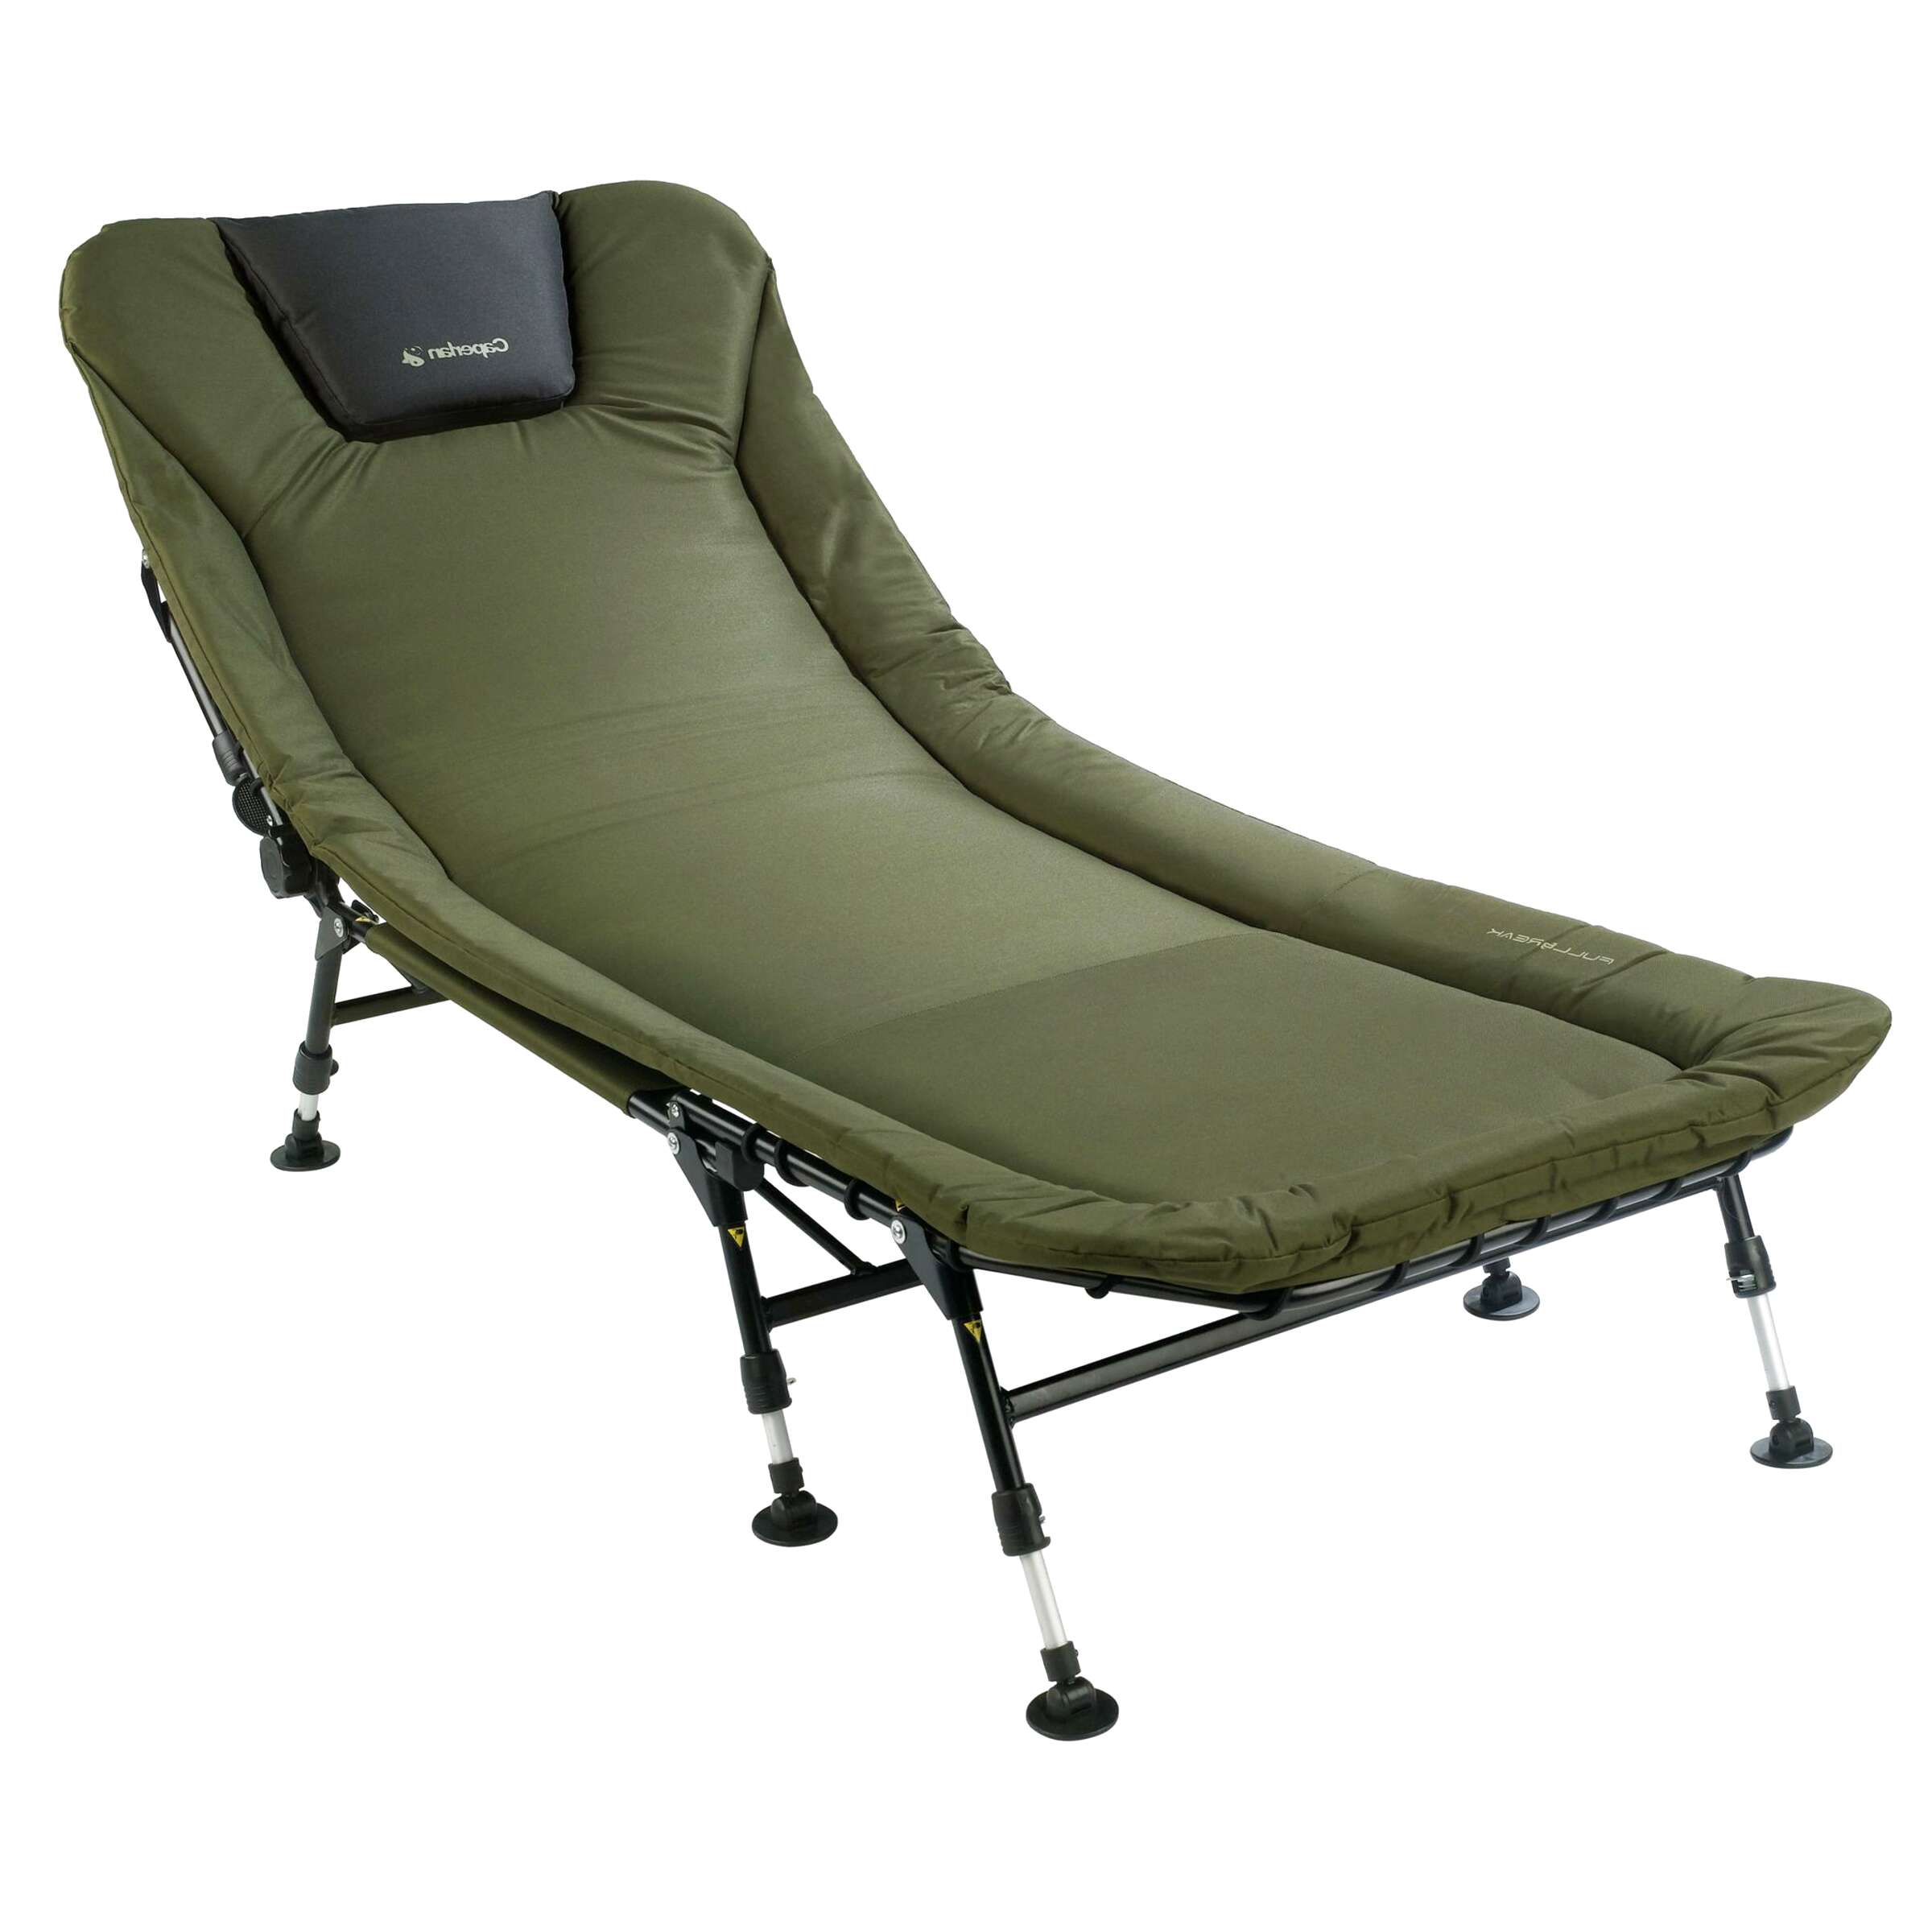 Second hand Fishing Bedchair in Ireland | View 40 ads